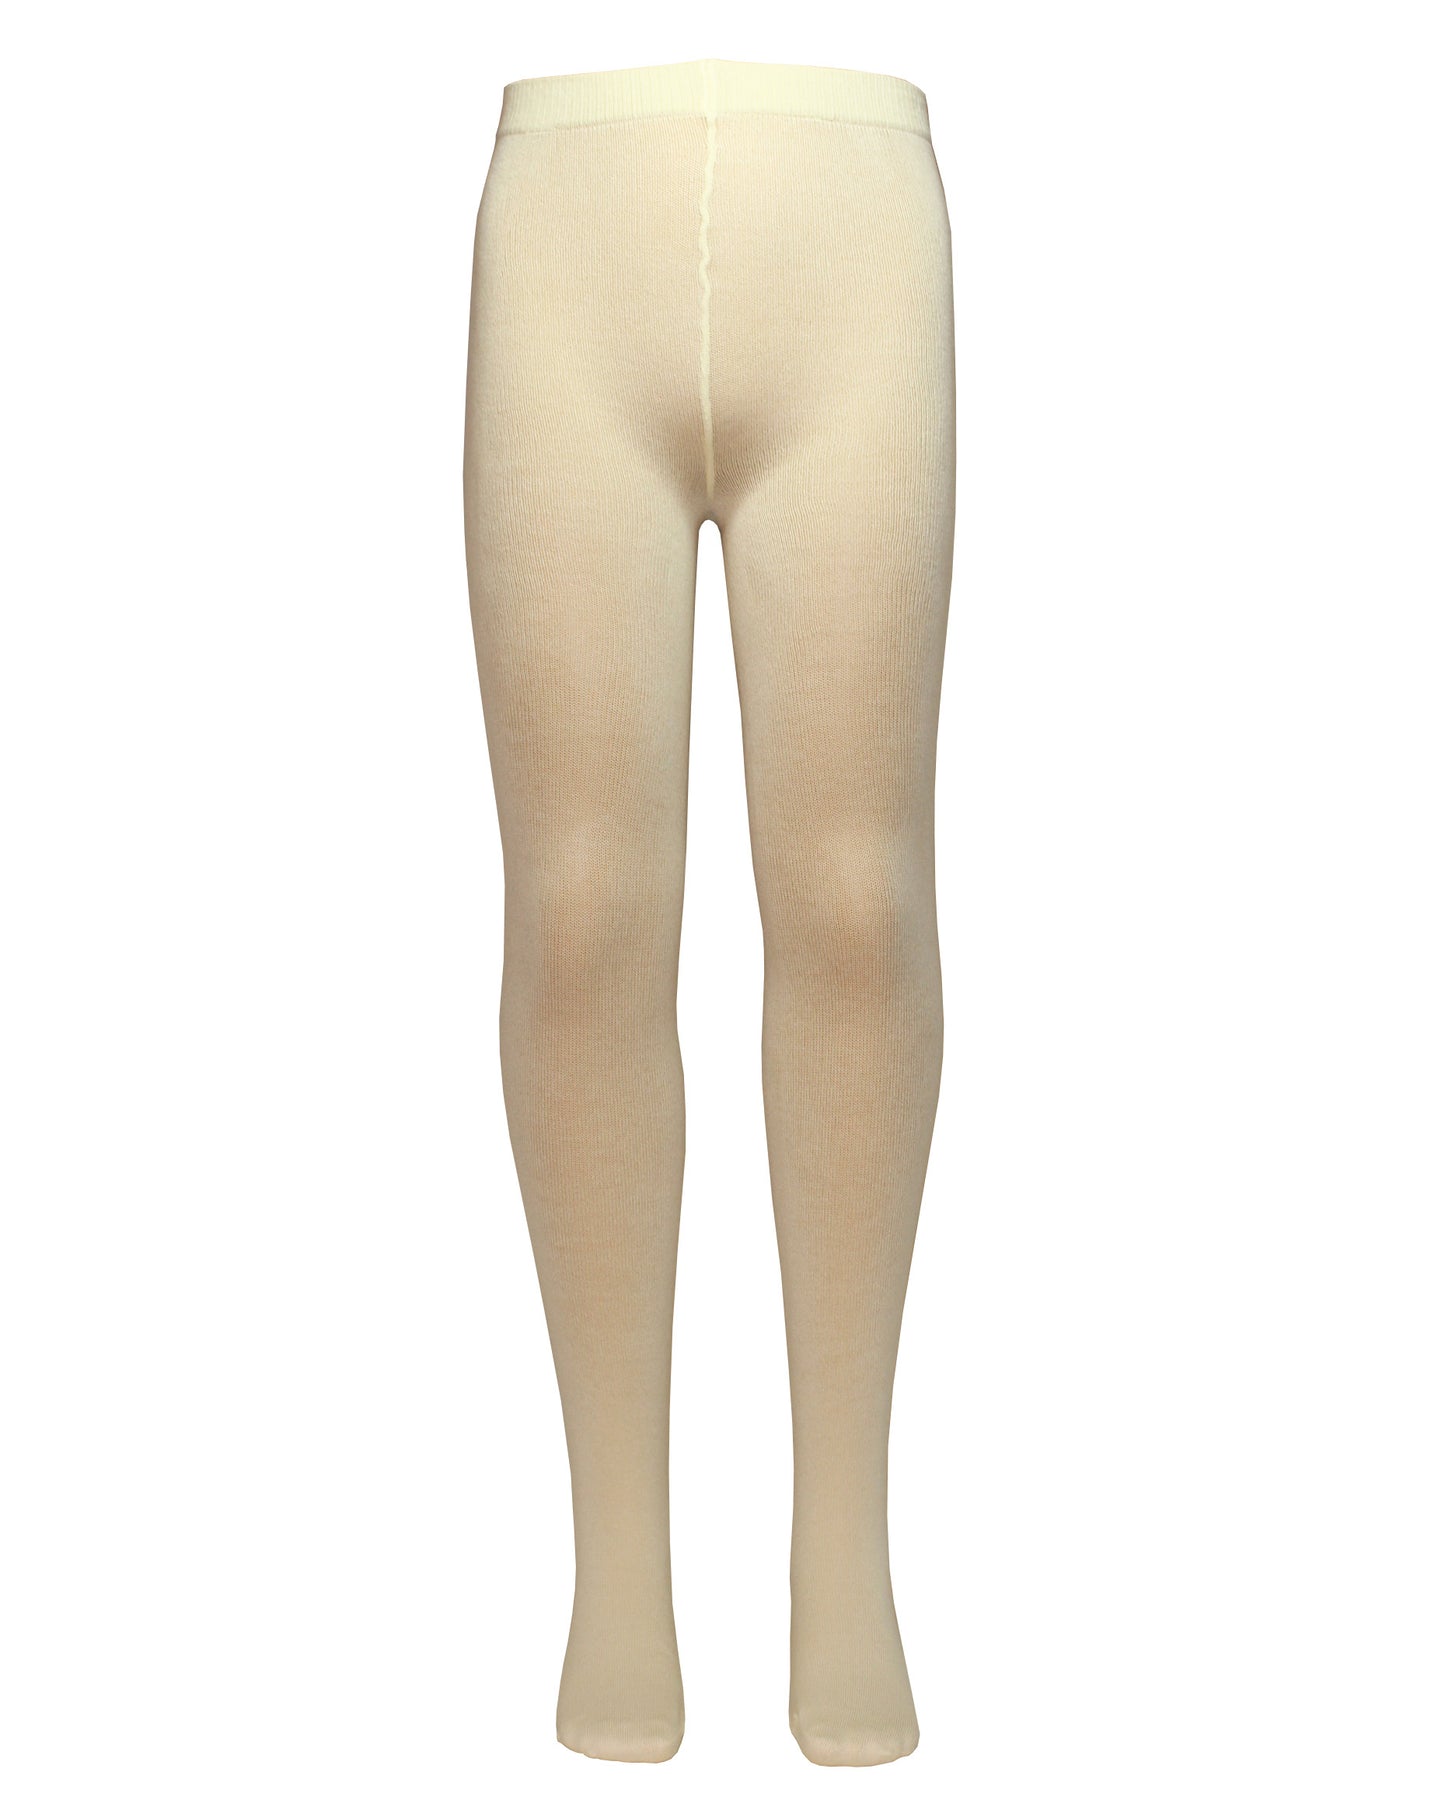 Omsa MiniCotton Collant - Cream soft cotton mix knitted tights with a deep comfort waistband and flat seamless toe.